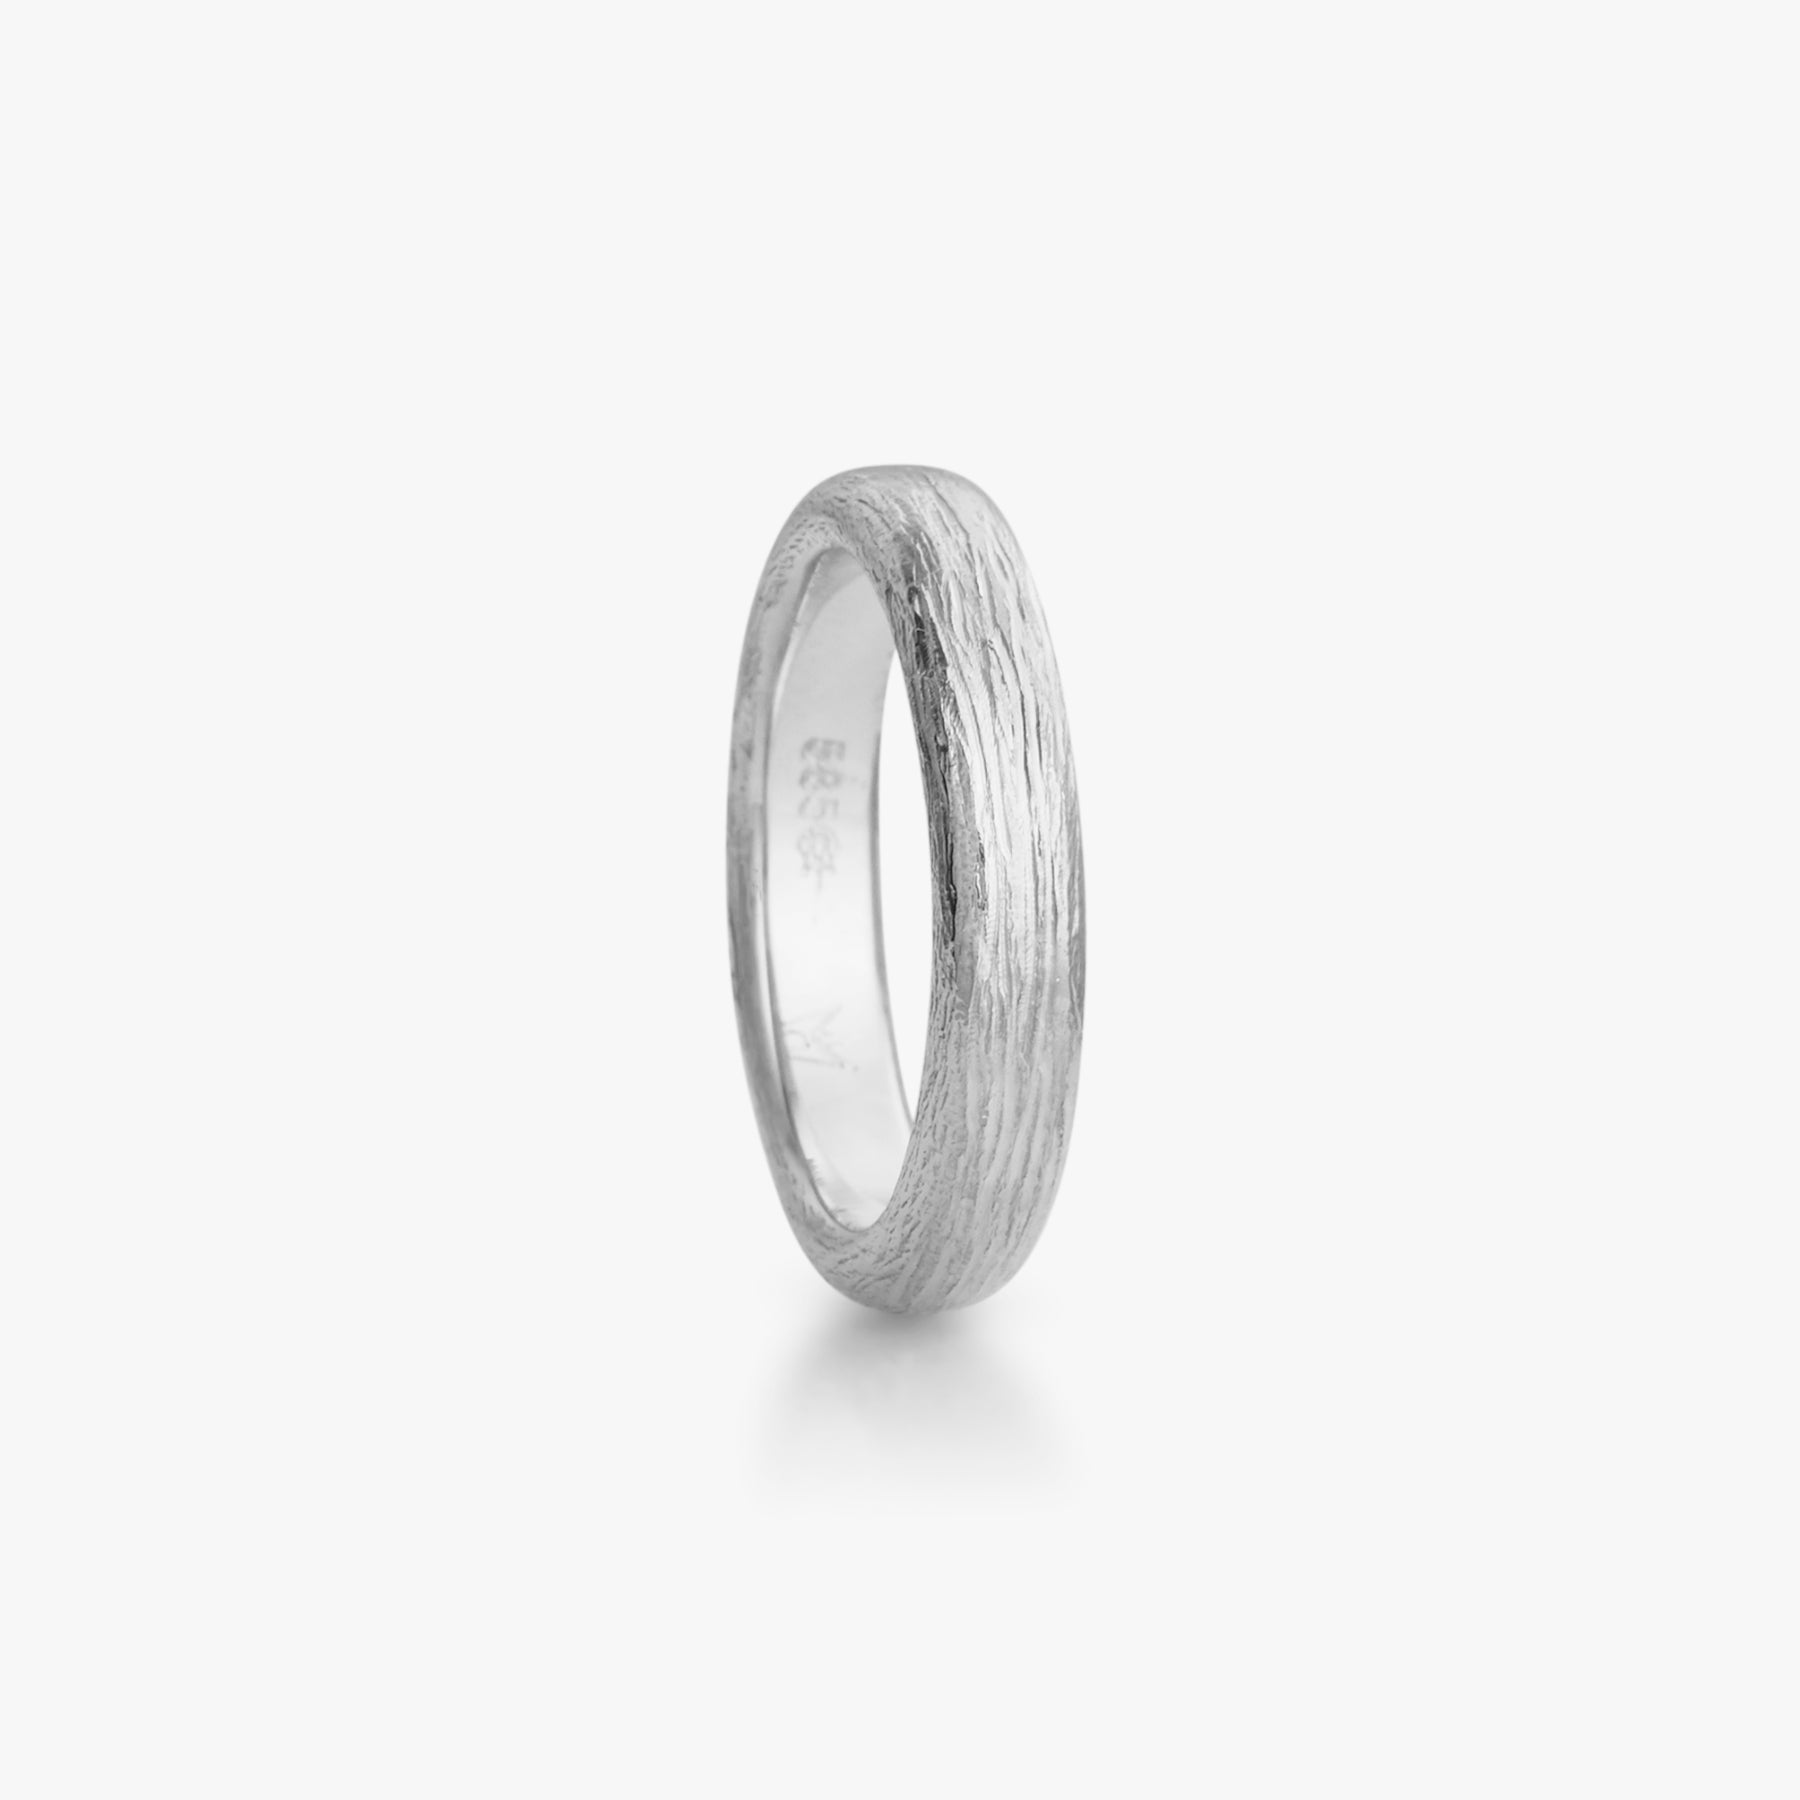 Fossefall ring in white gold, ladies